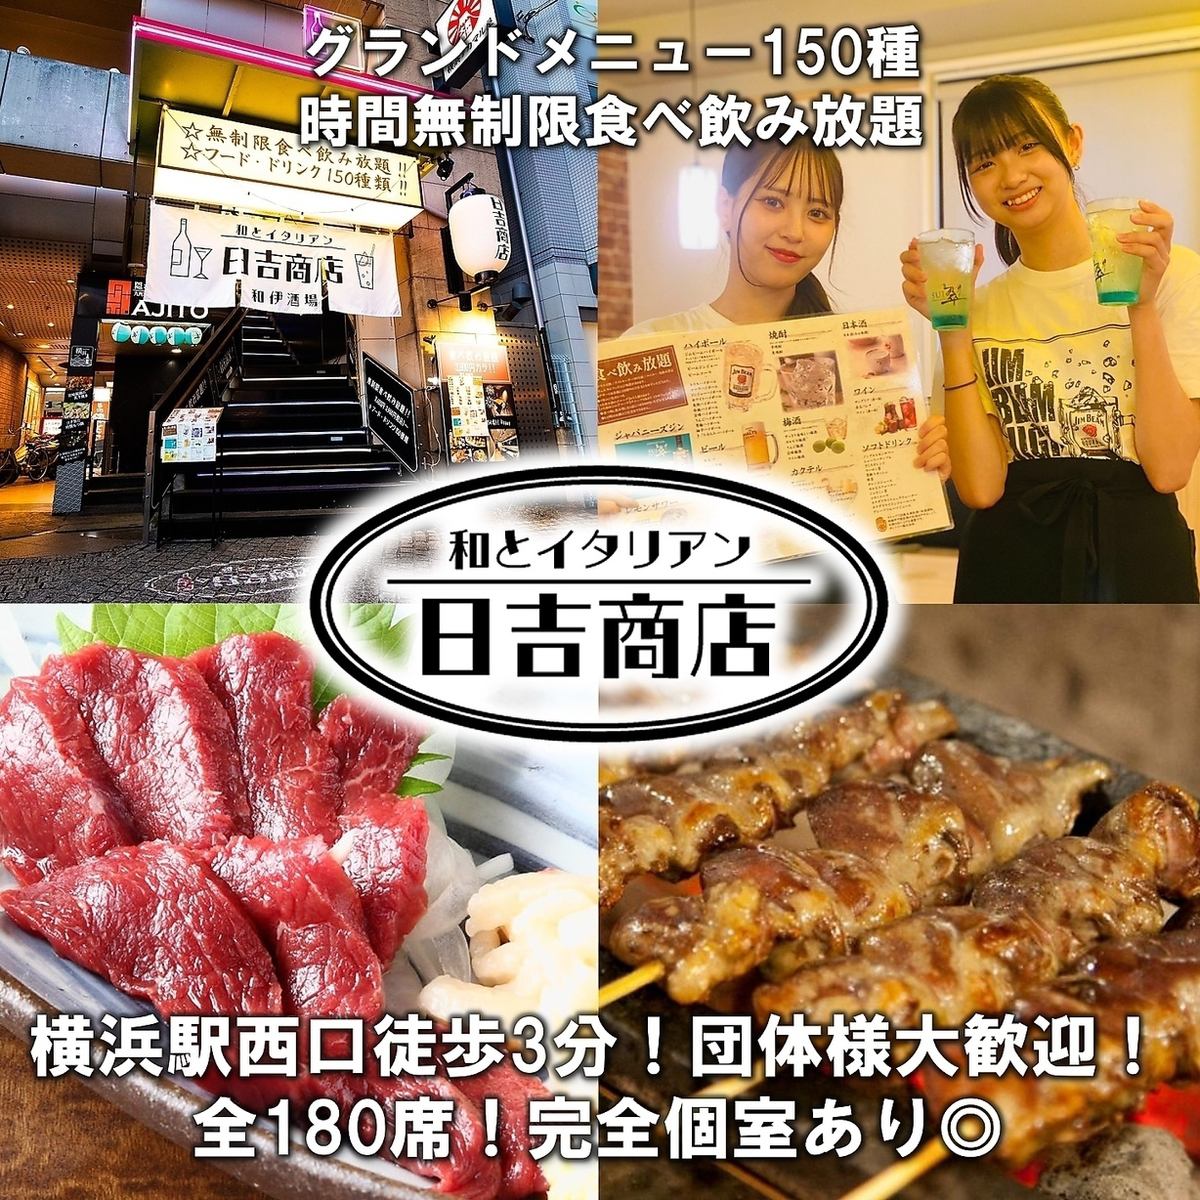 [All-you-can-drink with raw & Midori gin] Seat reservation only + unlimited all-you-can-drink 1,800 yen